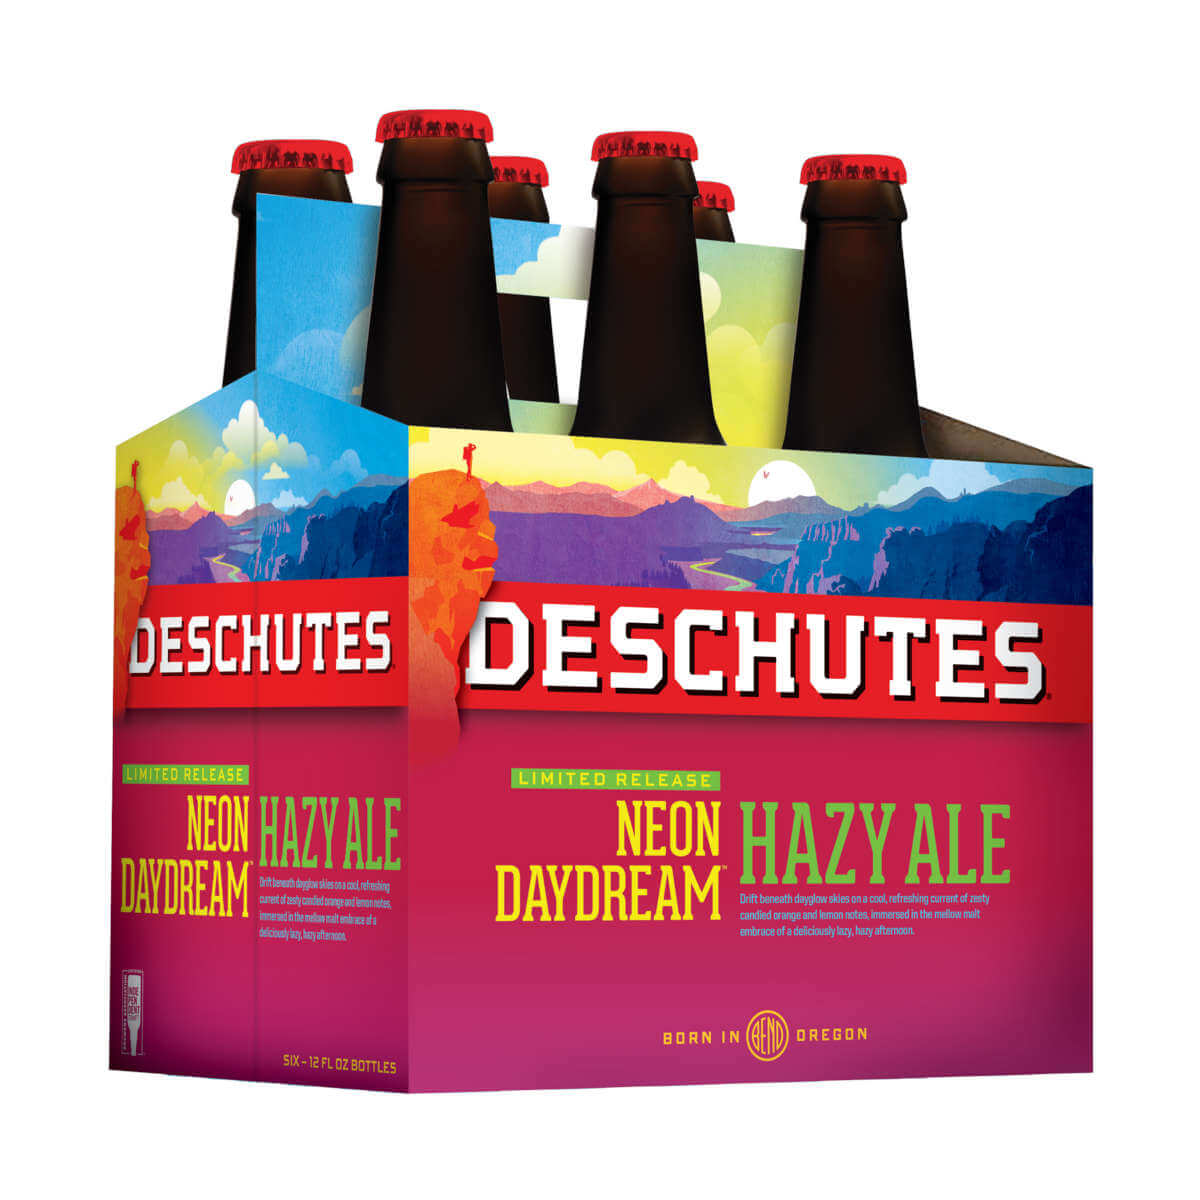 New summer seasonal and small batch reserve beers from Deschutes Brewery